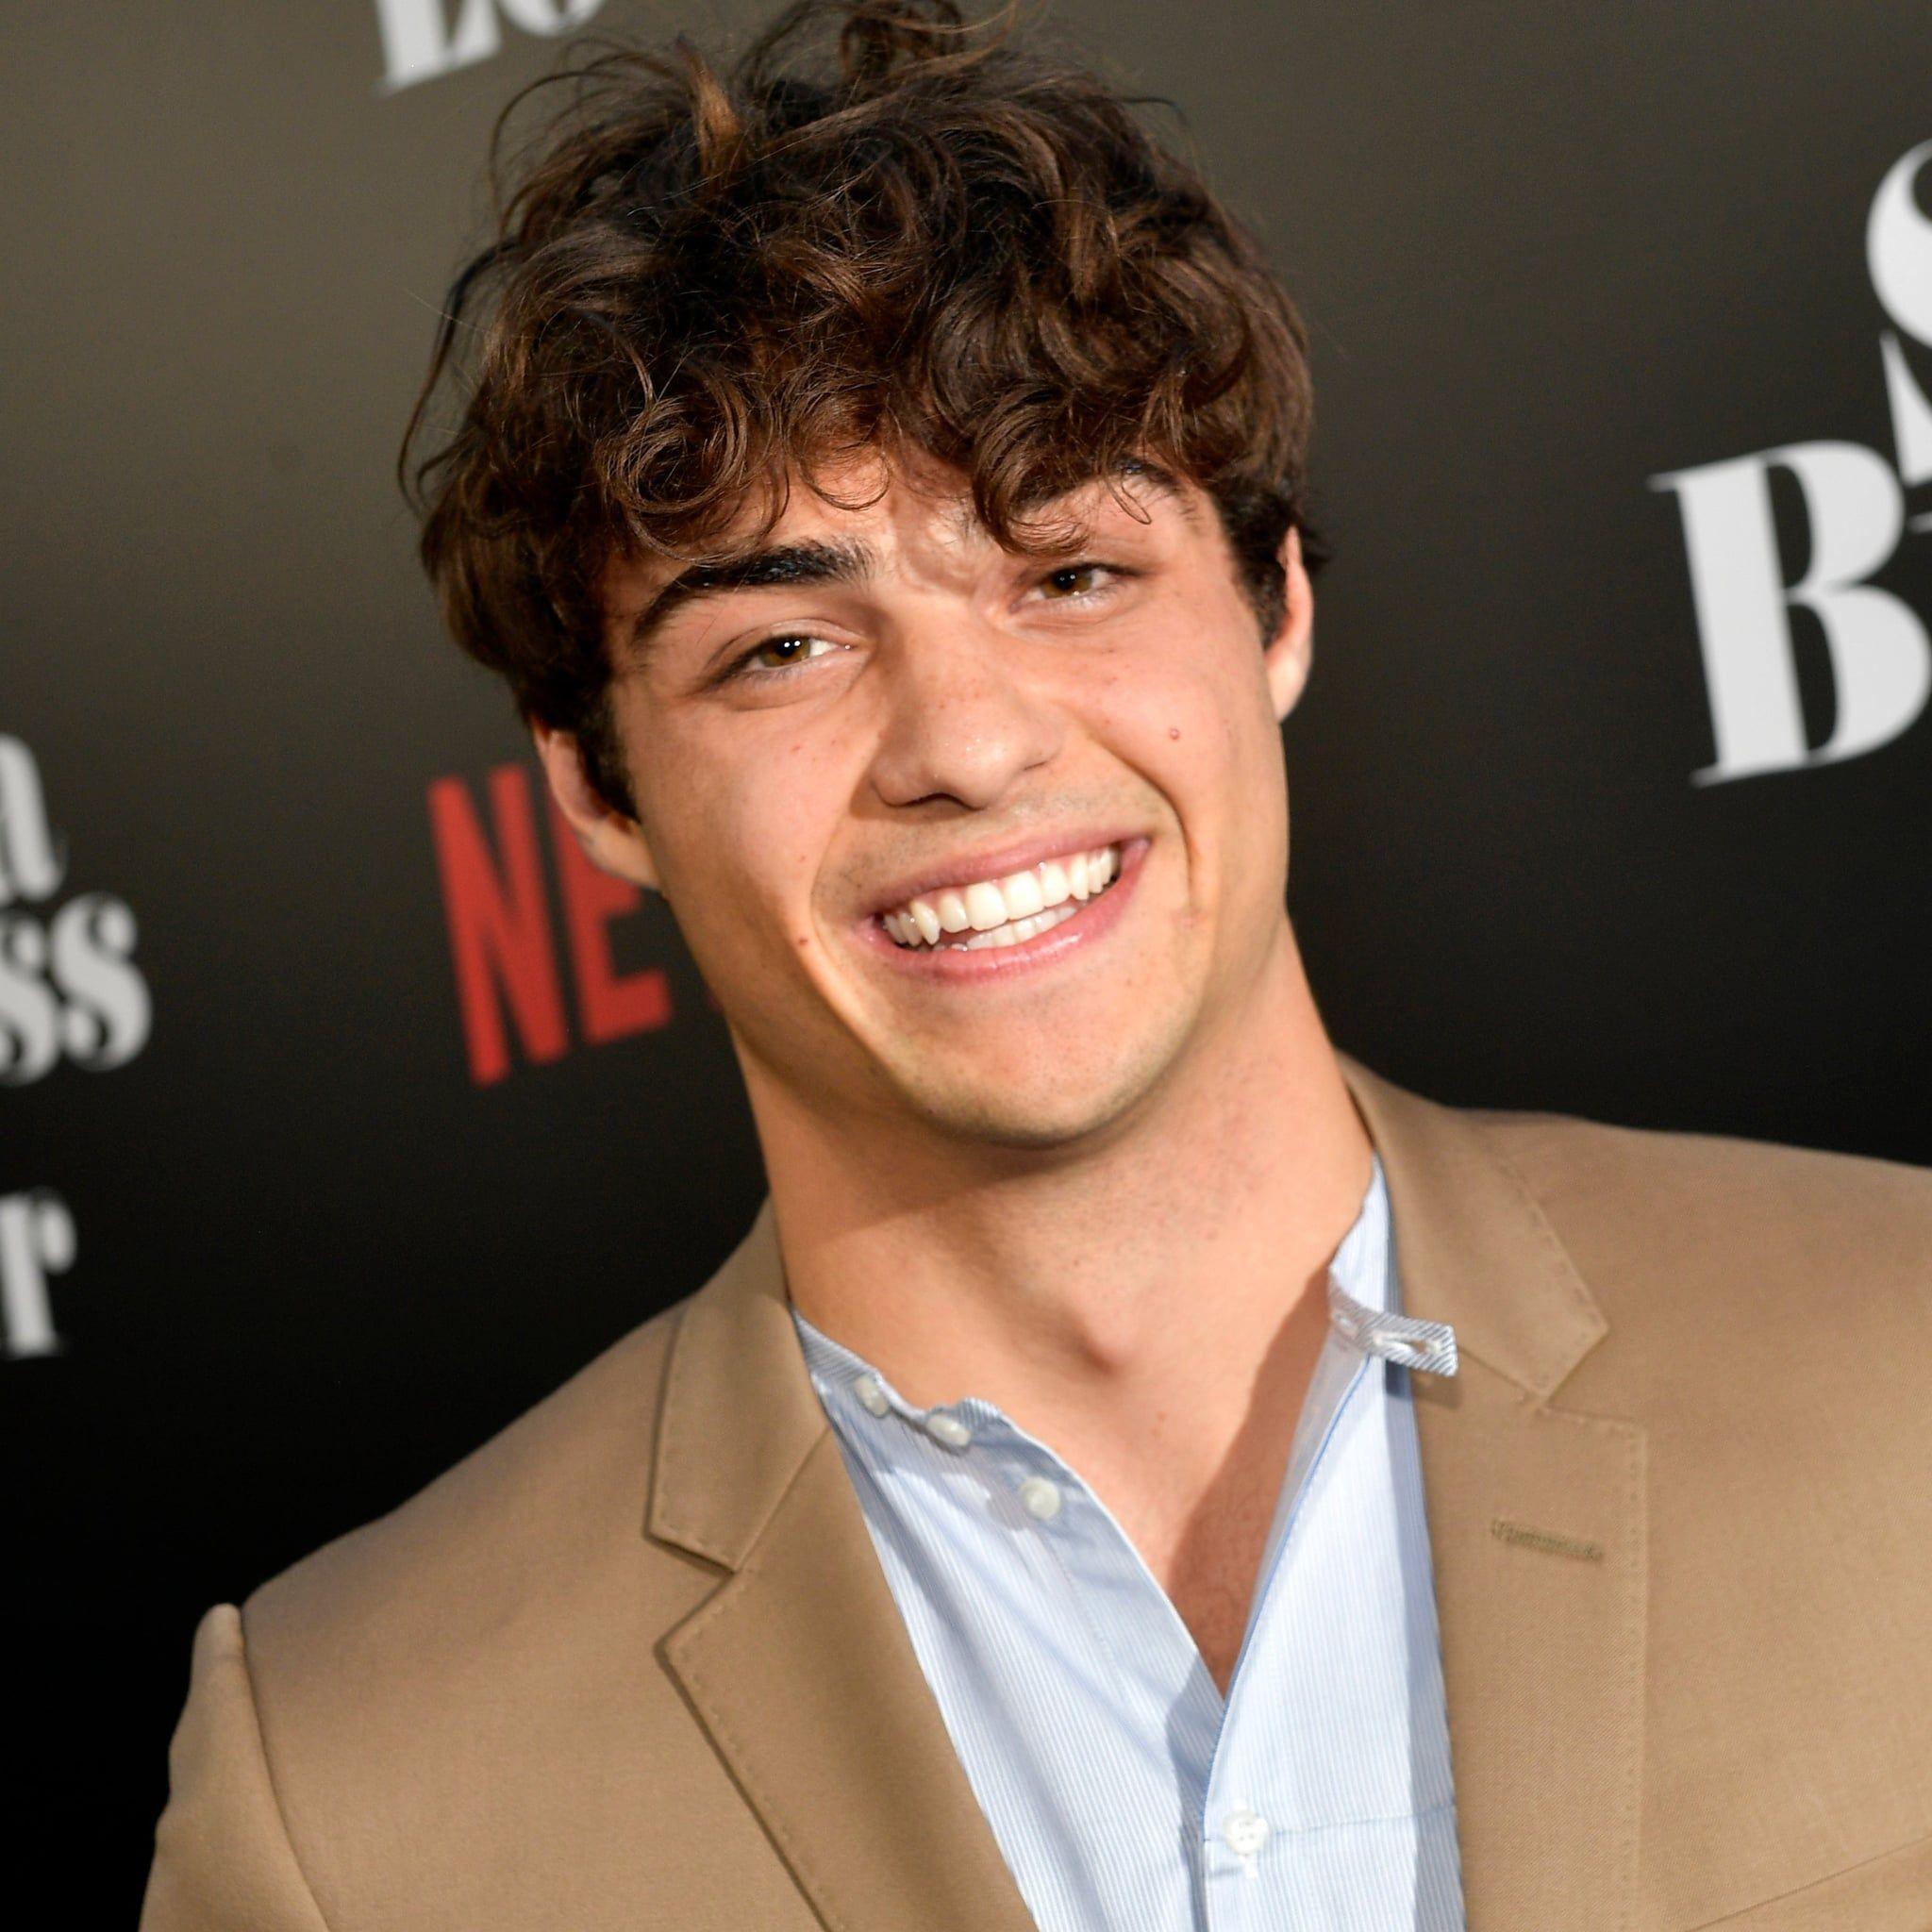 Noah Centineo Wallpapers - Top Free Noah Centineo Backgrounds ...